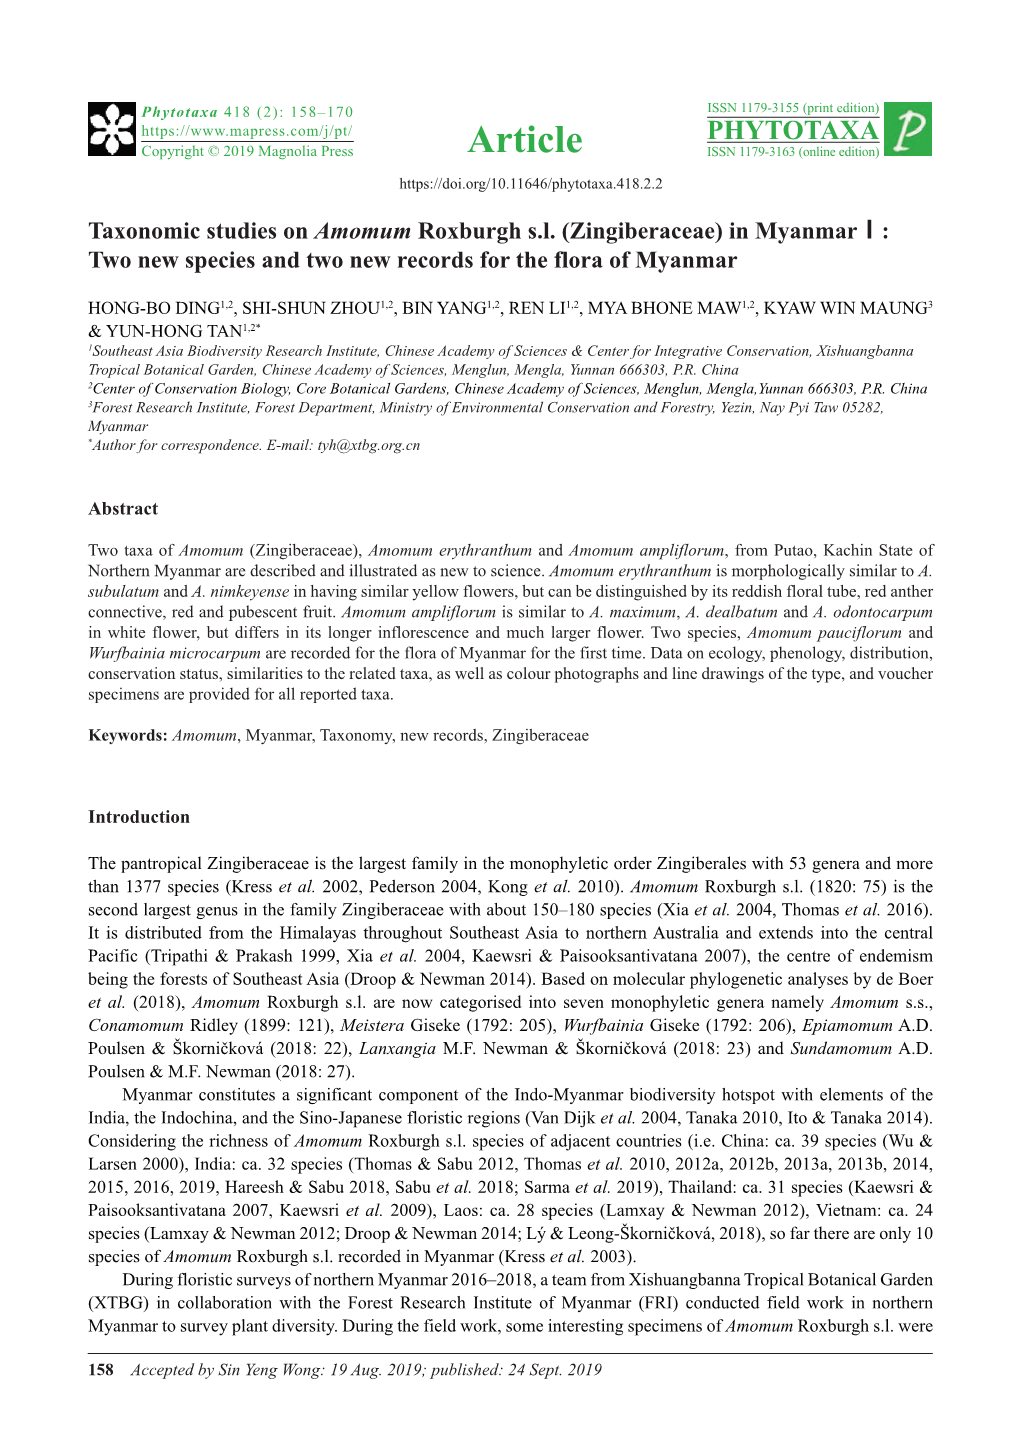 Taxonomic Studies on Amomum Roxburgh S.L. (Zingiberaceae) in Myanmarⅰ: Two New Species and Two New Records for the Flora of Myanmar